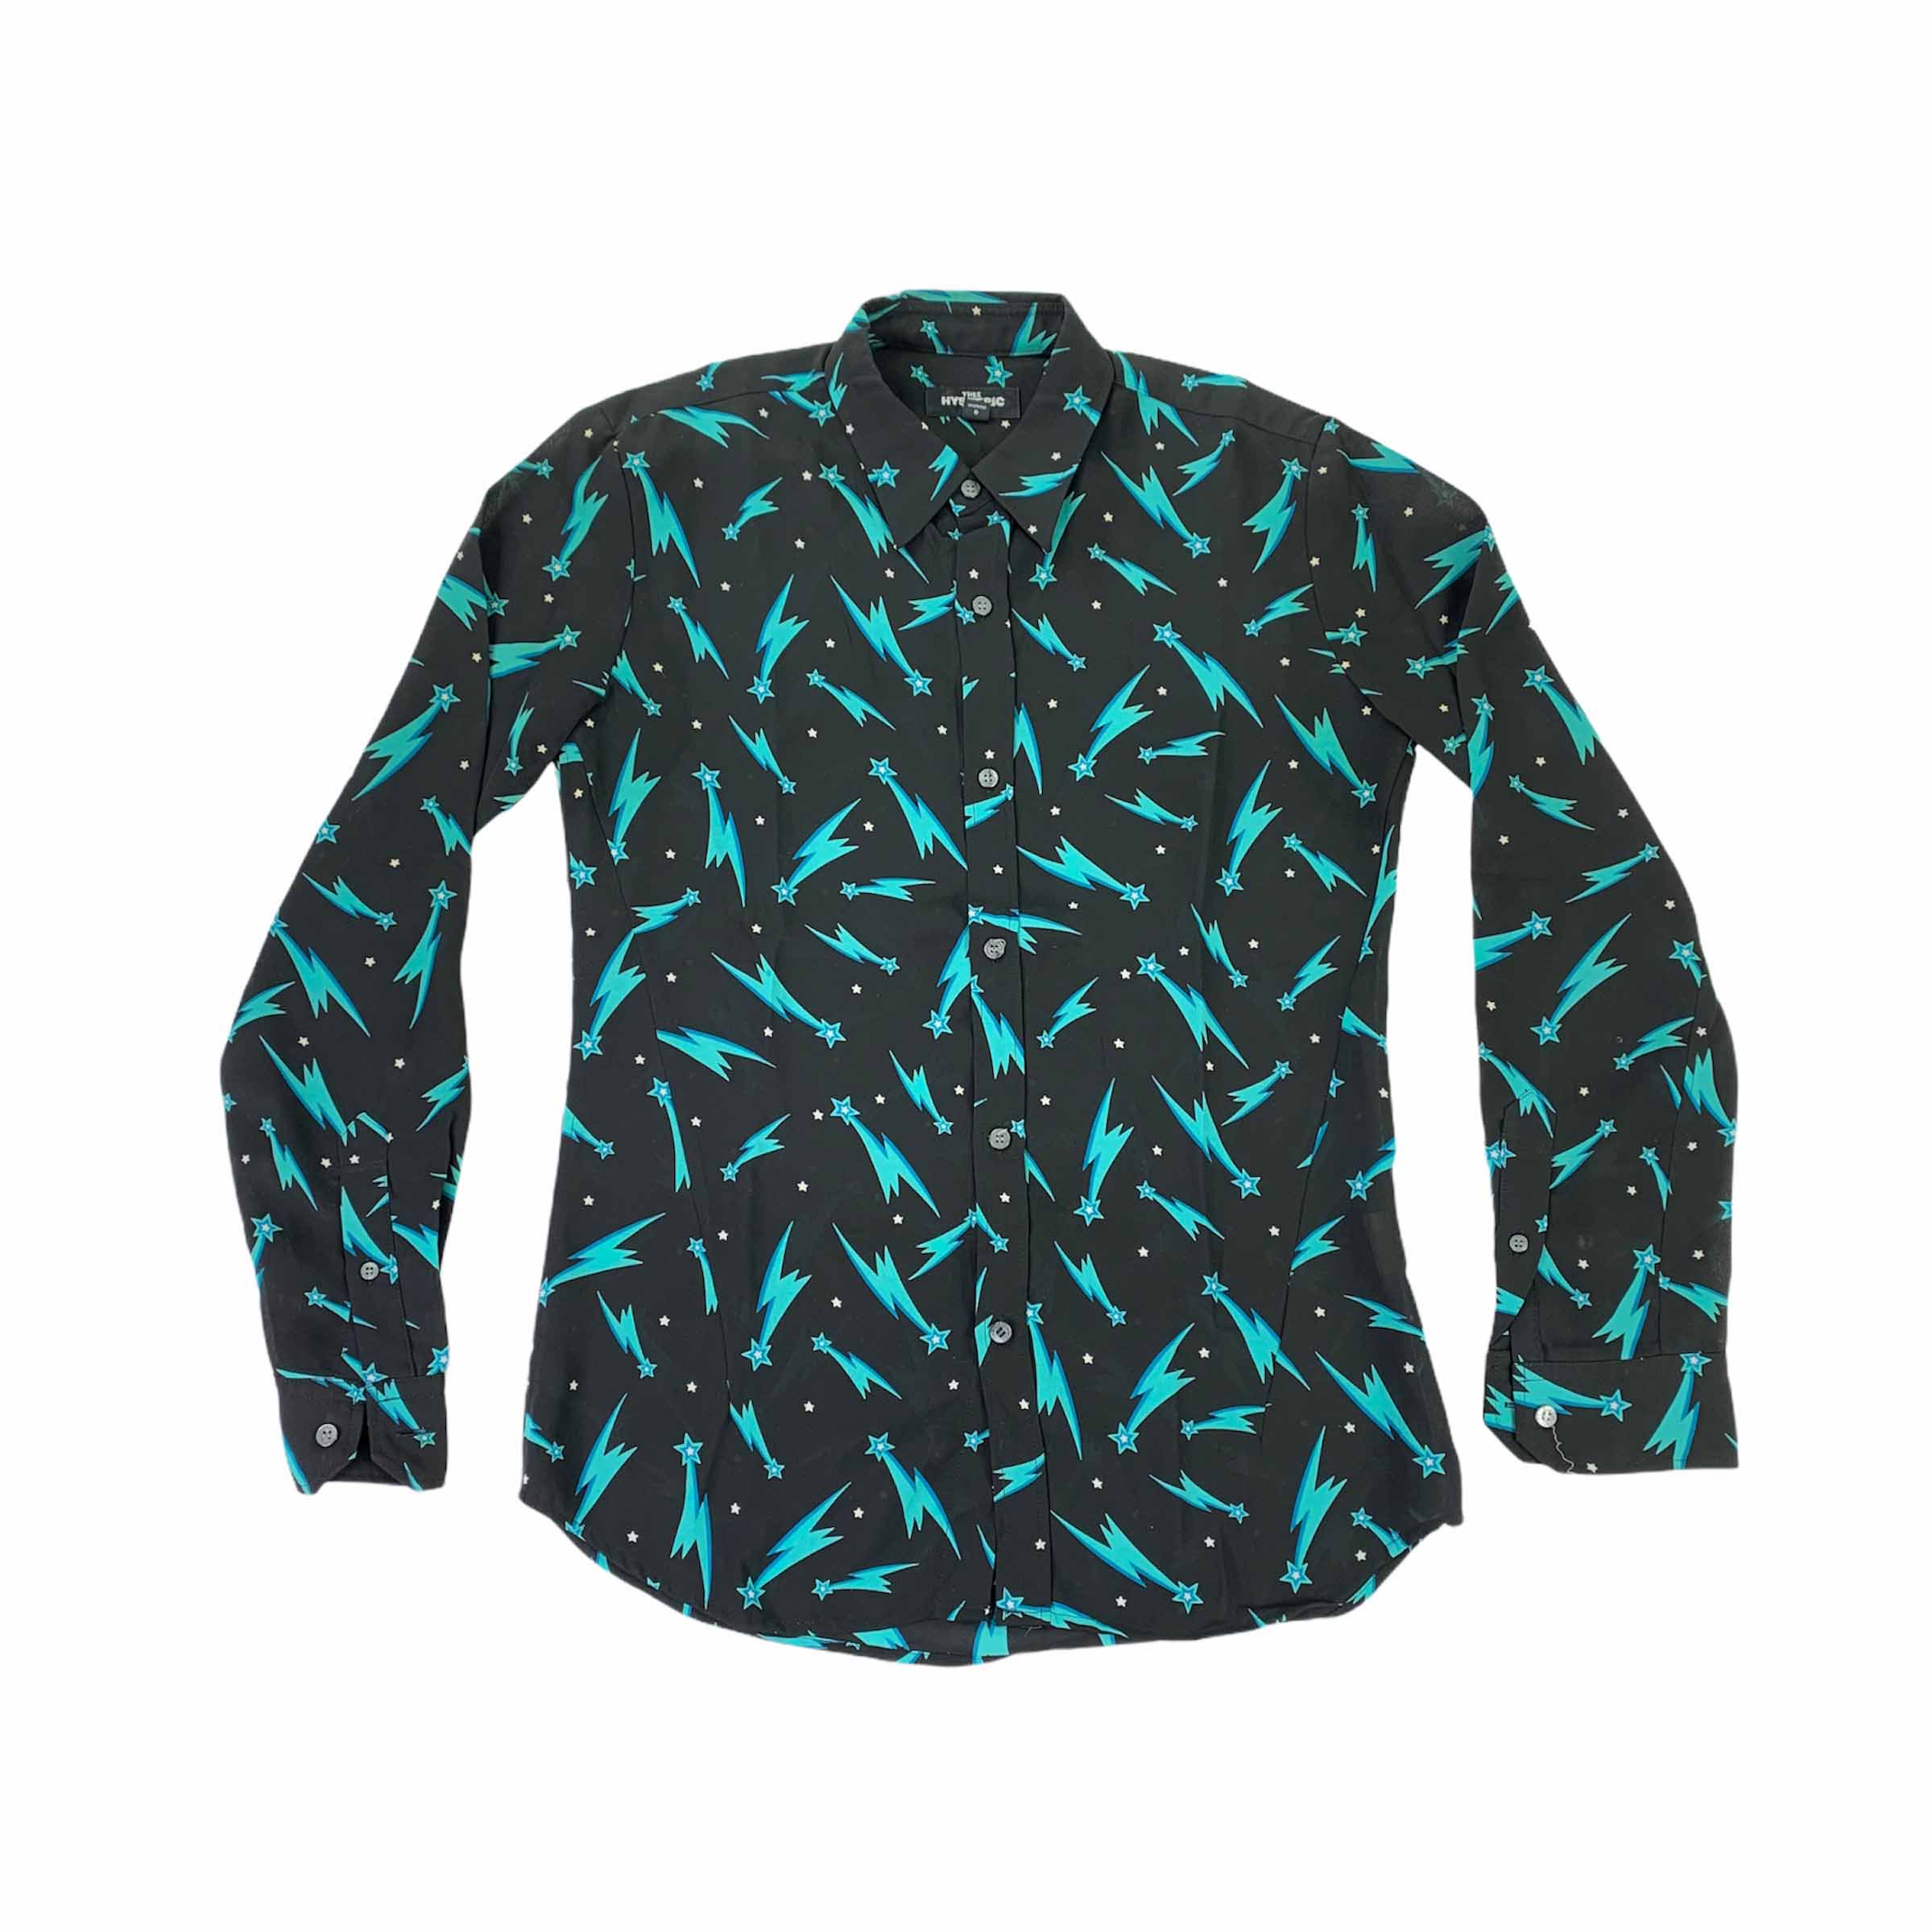 [Hysteric Glamour] Meteor Print See-Through Long Sleeve Shirt - Size S